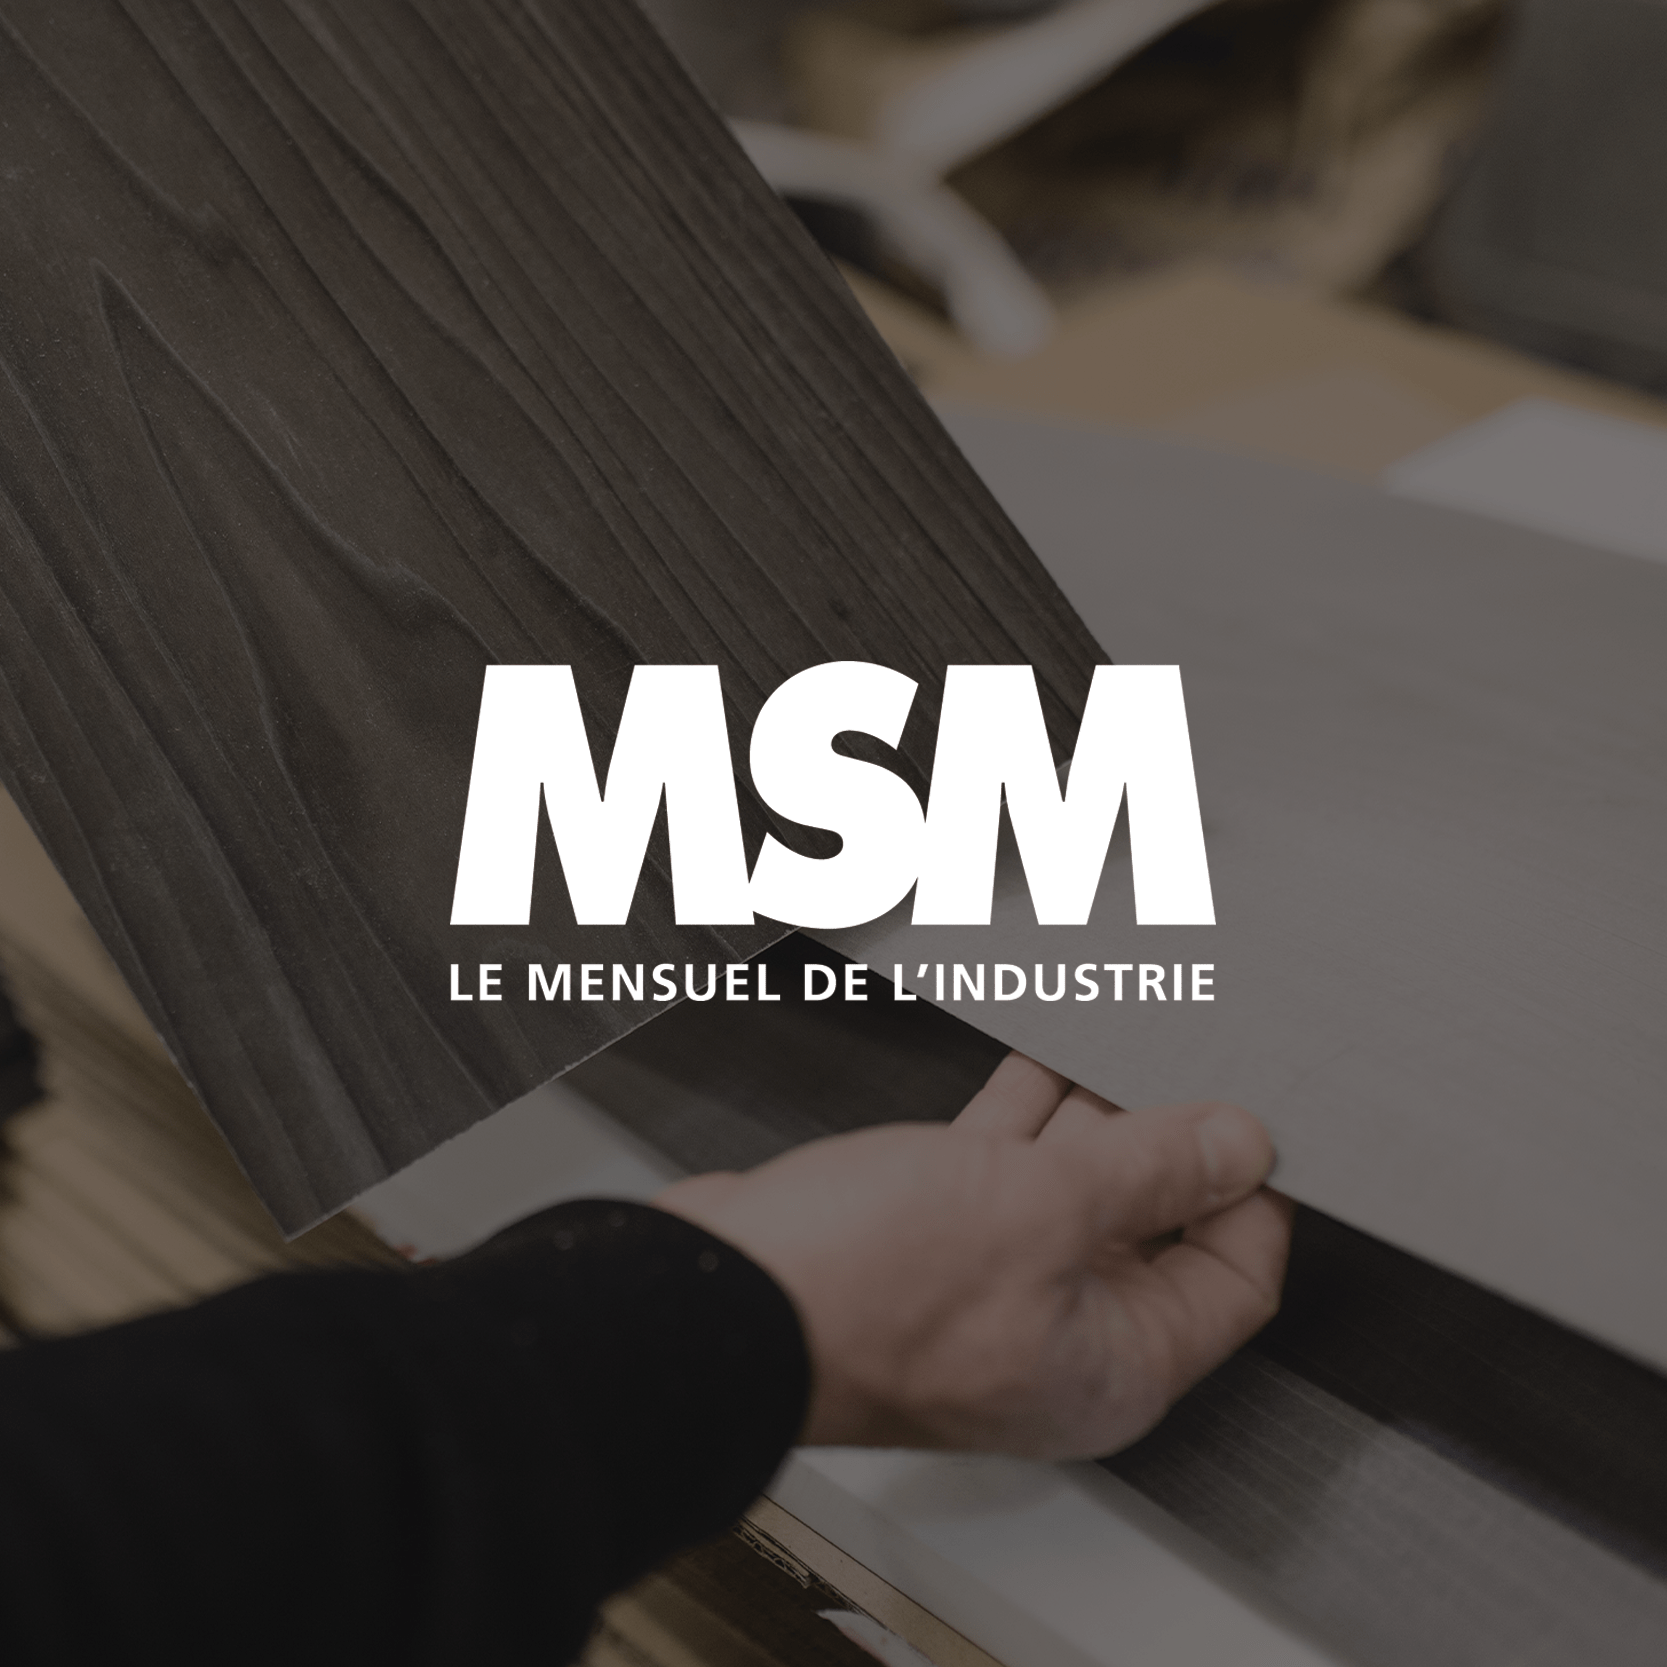 MSM highlights our latest material innovations in the dossier “Materials of today and tomorrow” in its latest issue.MSM met en avant nos dernières innovations matériaux dans le dossier “matériaux actuel et du futur” de son dernier numéro.